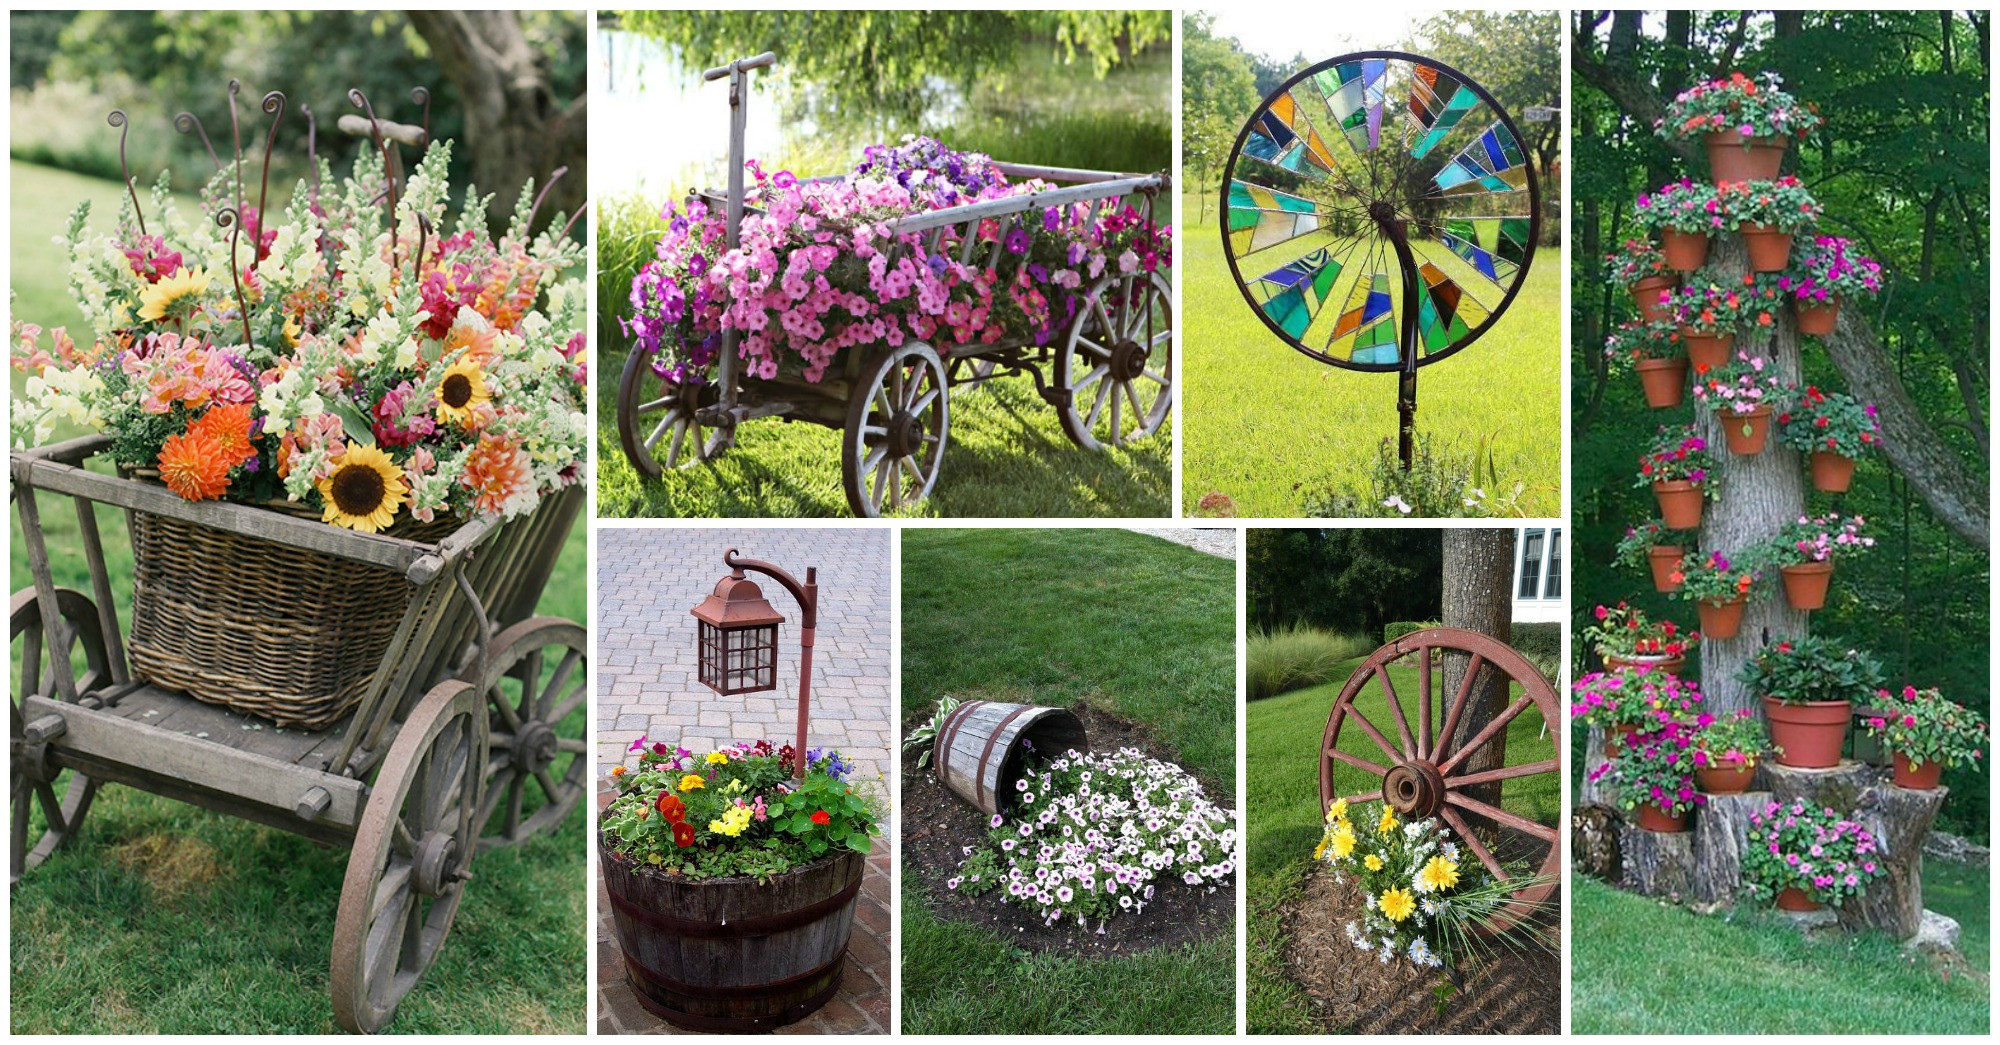 DIY Outdoor Decor Ideas
 20 Amazing DIY Projects To Enhance Your Yard Without